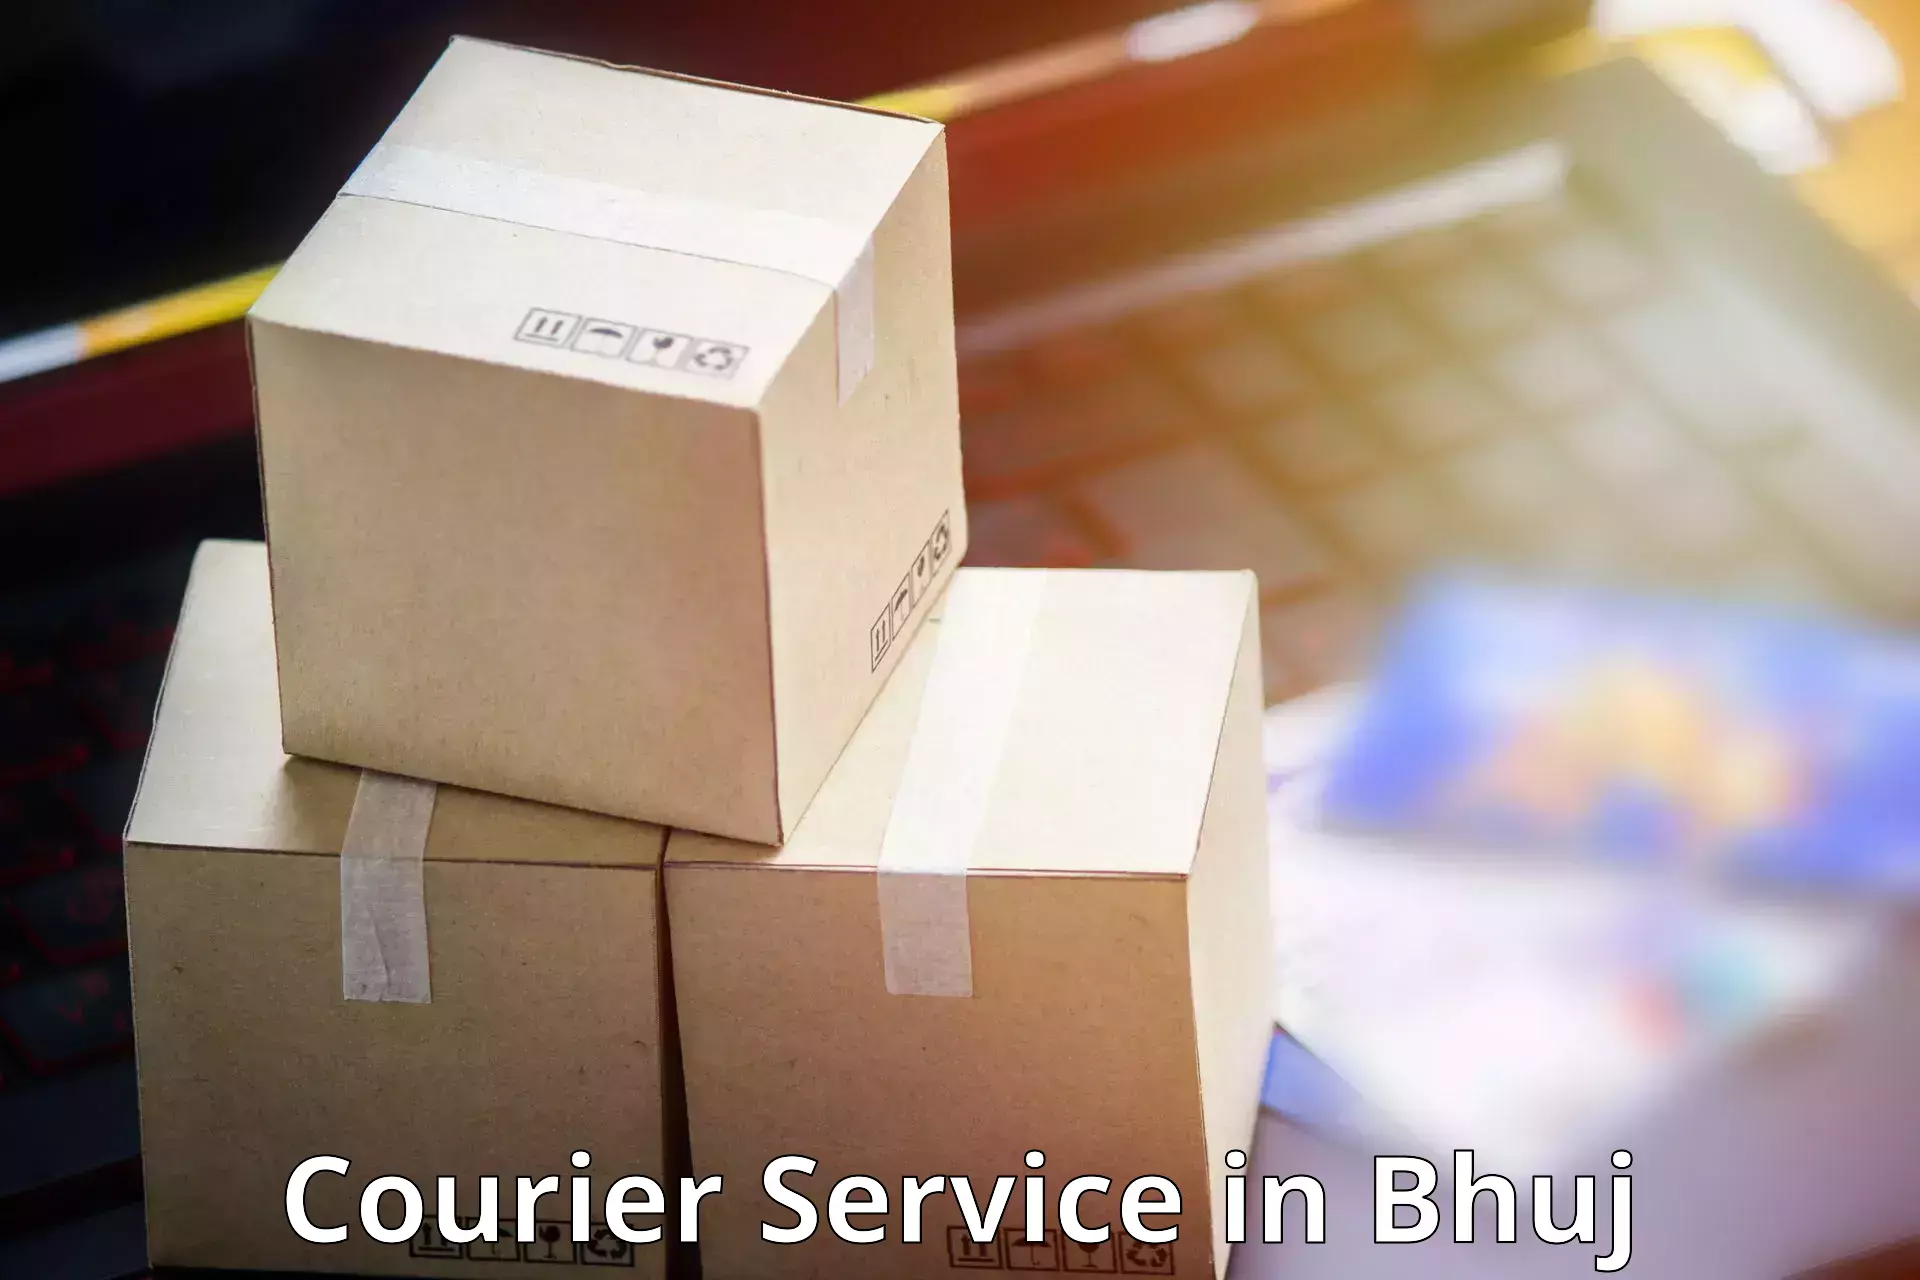 Expedited parcel delivery in Bhuj